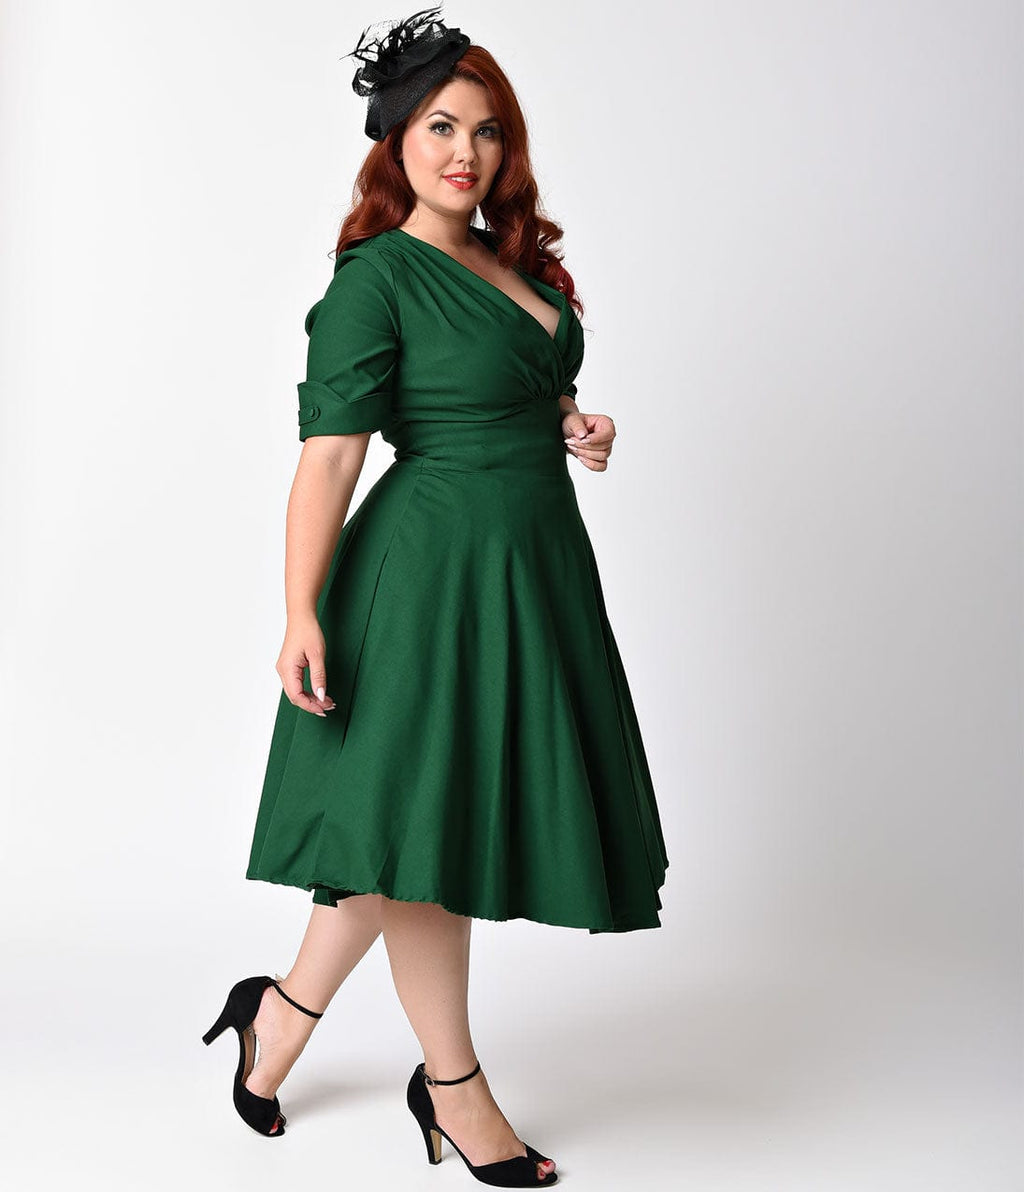 Unique Vintage Plus Size Emerald Green Delores Swing Dress with Sleeve